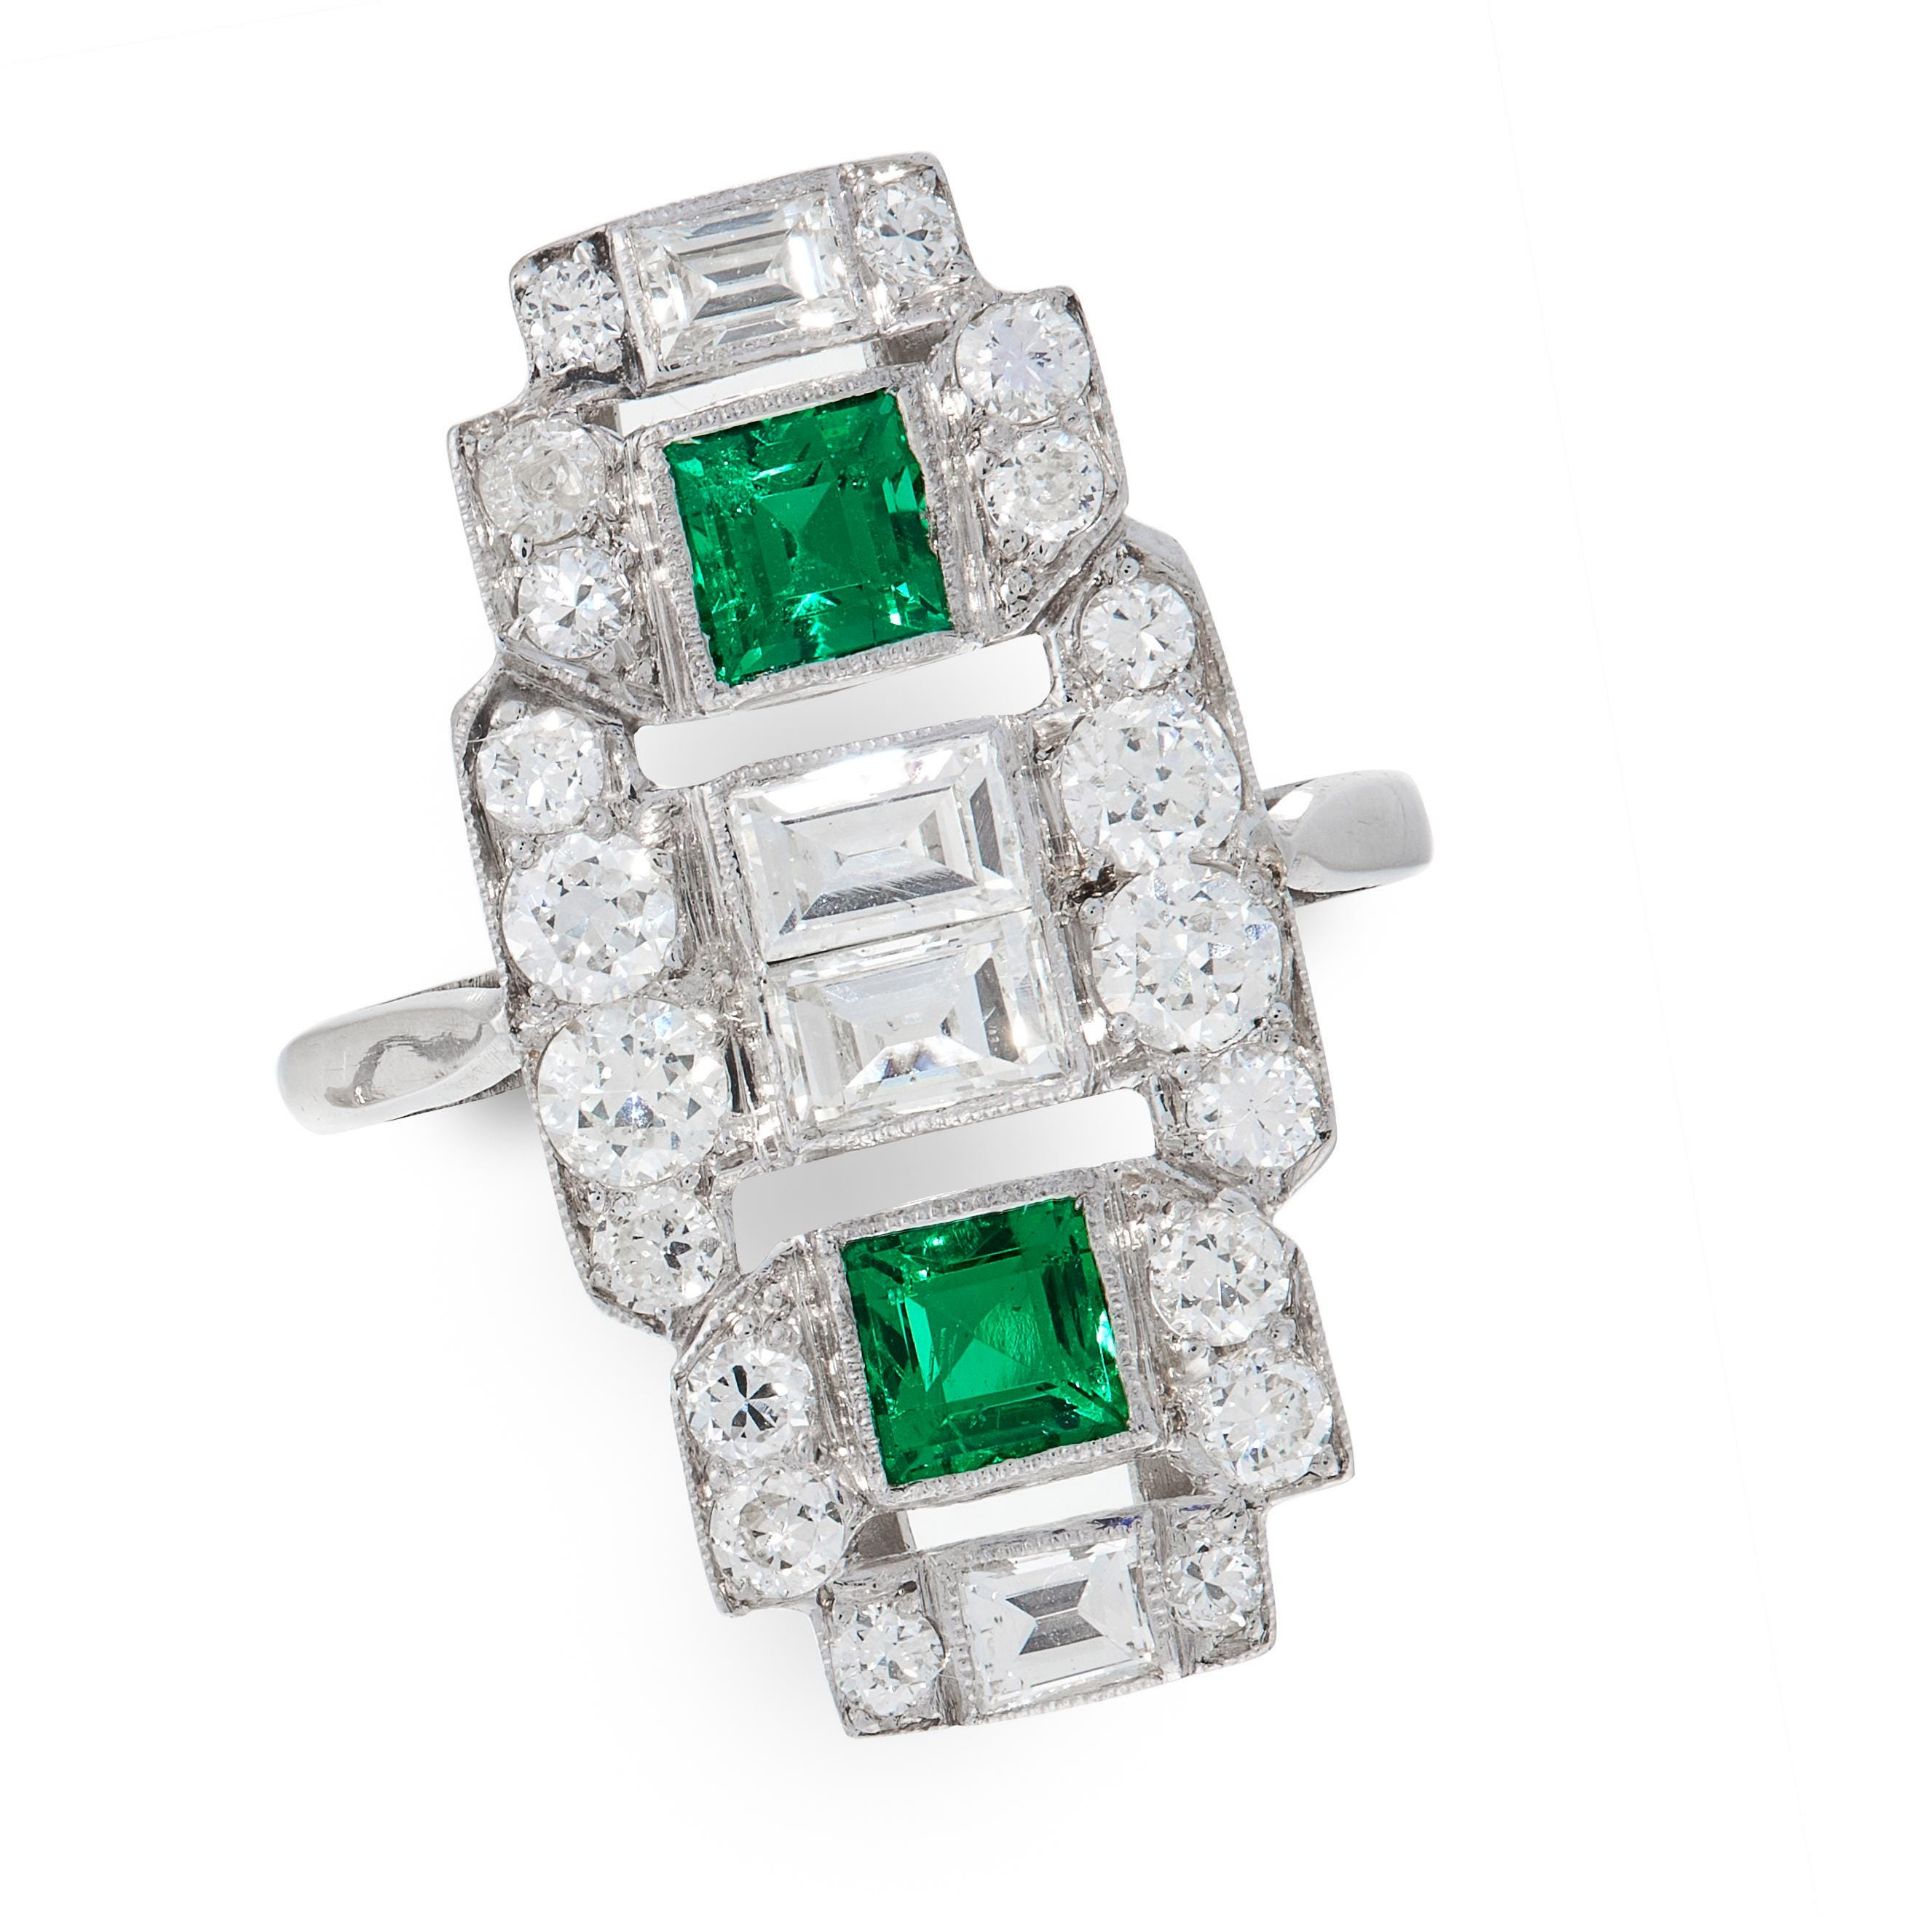 AN ART DECO EMERALD AND DIAMOND DRESS RING, CIRCA 1930 set with two square step cut emeralds and